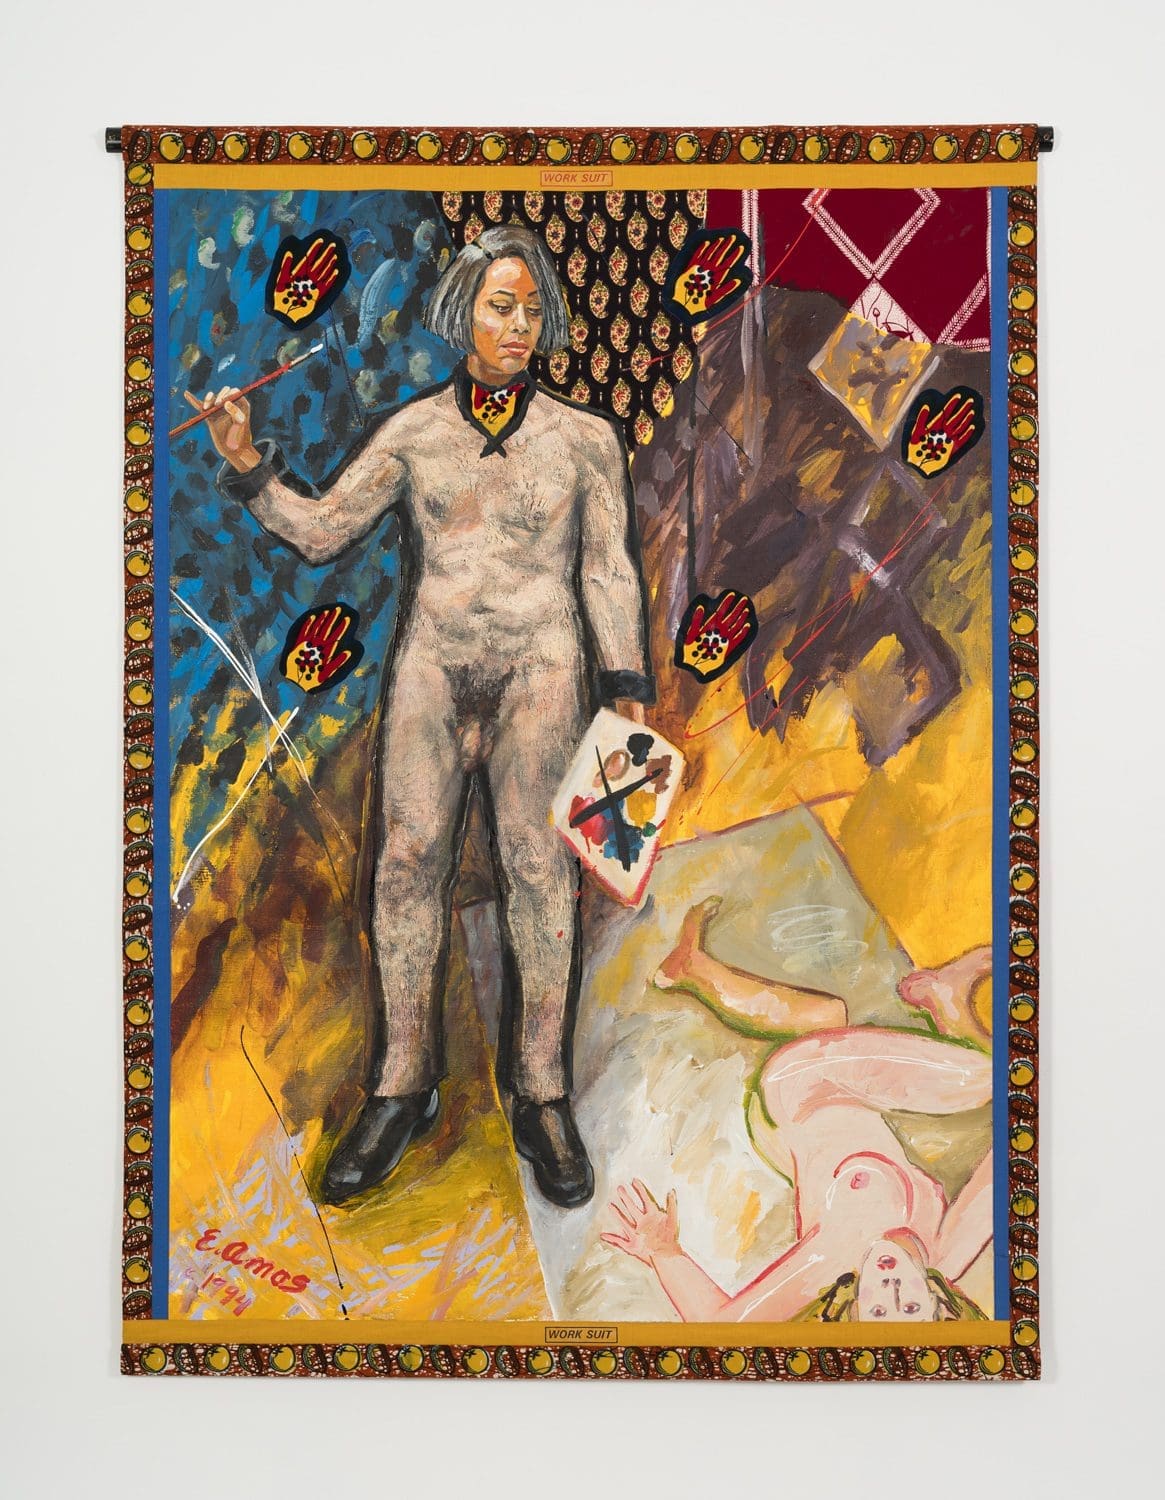 Work Suit, 1994, Acrylic on linen with African fabric borders and photo transfer, 74 1/2 × 54 1/2 inches (189.2 × 138.4 cm)